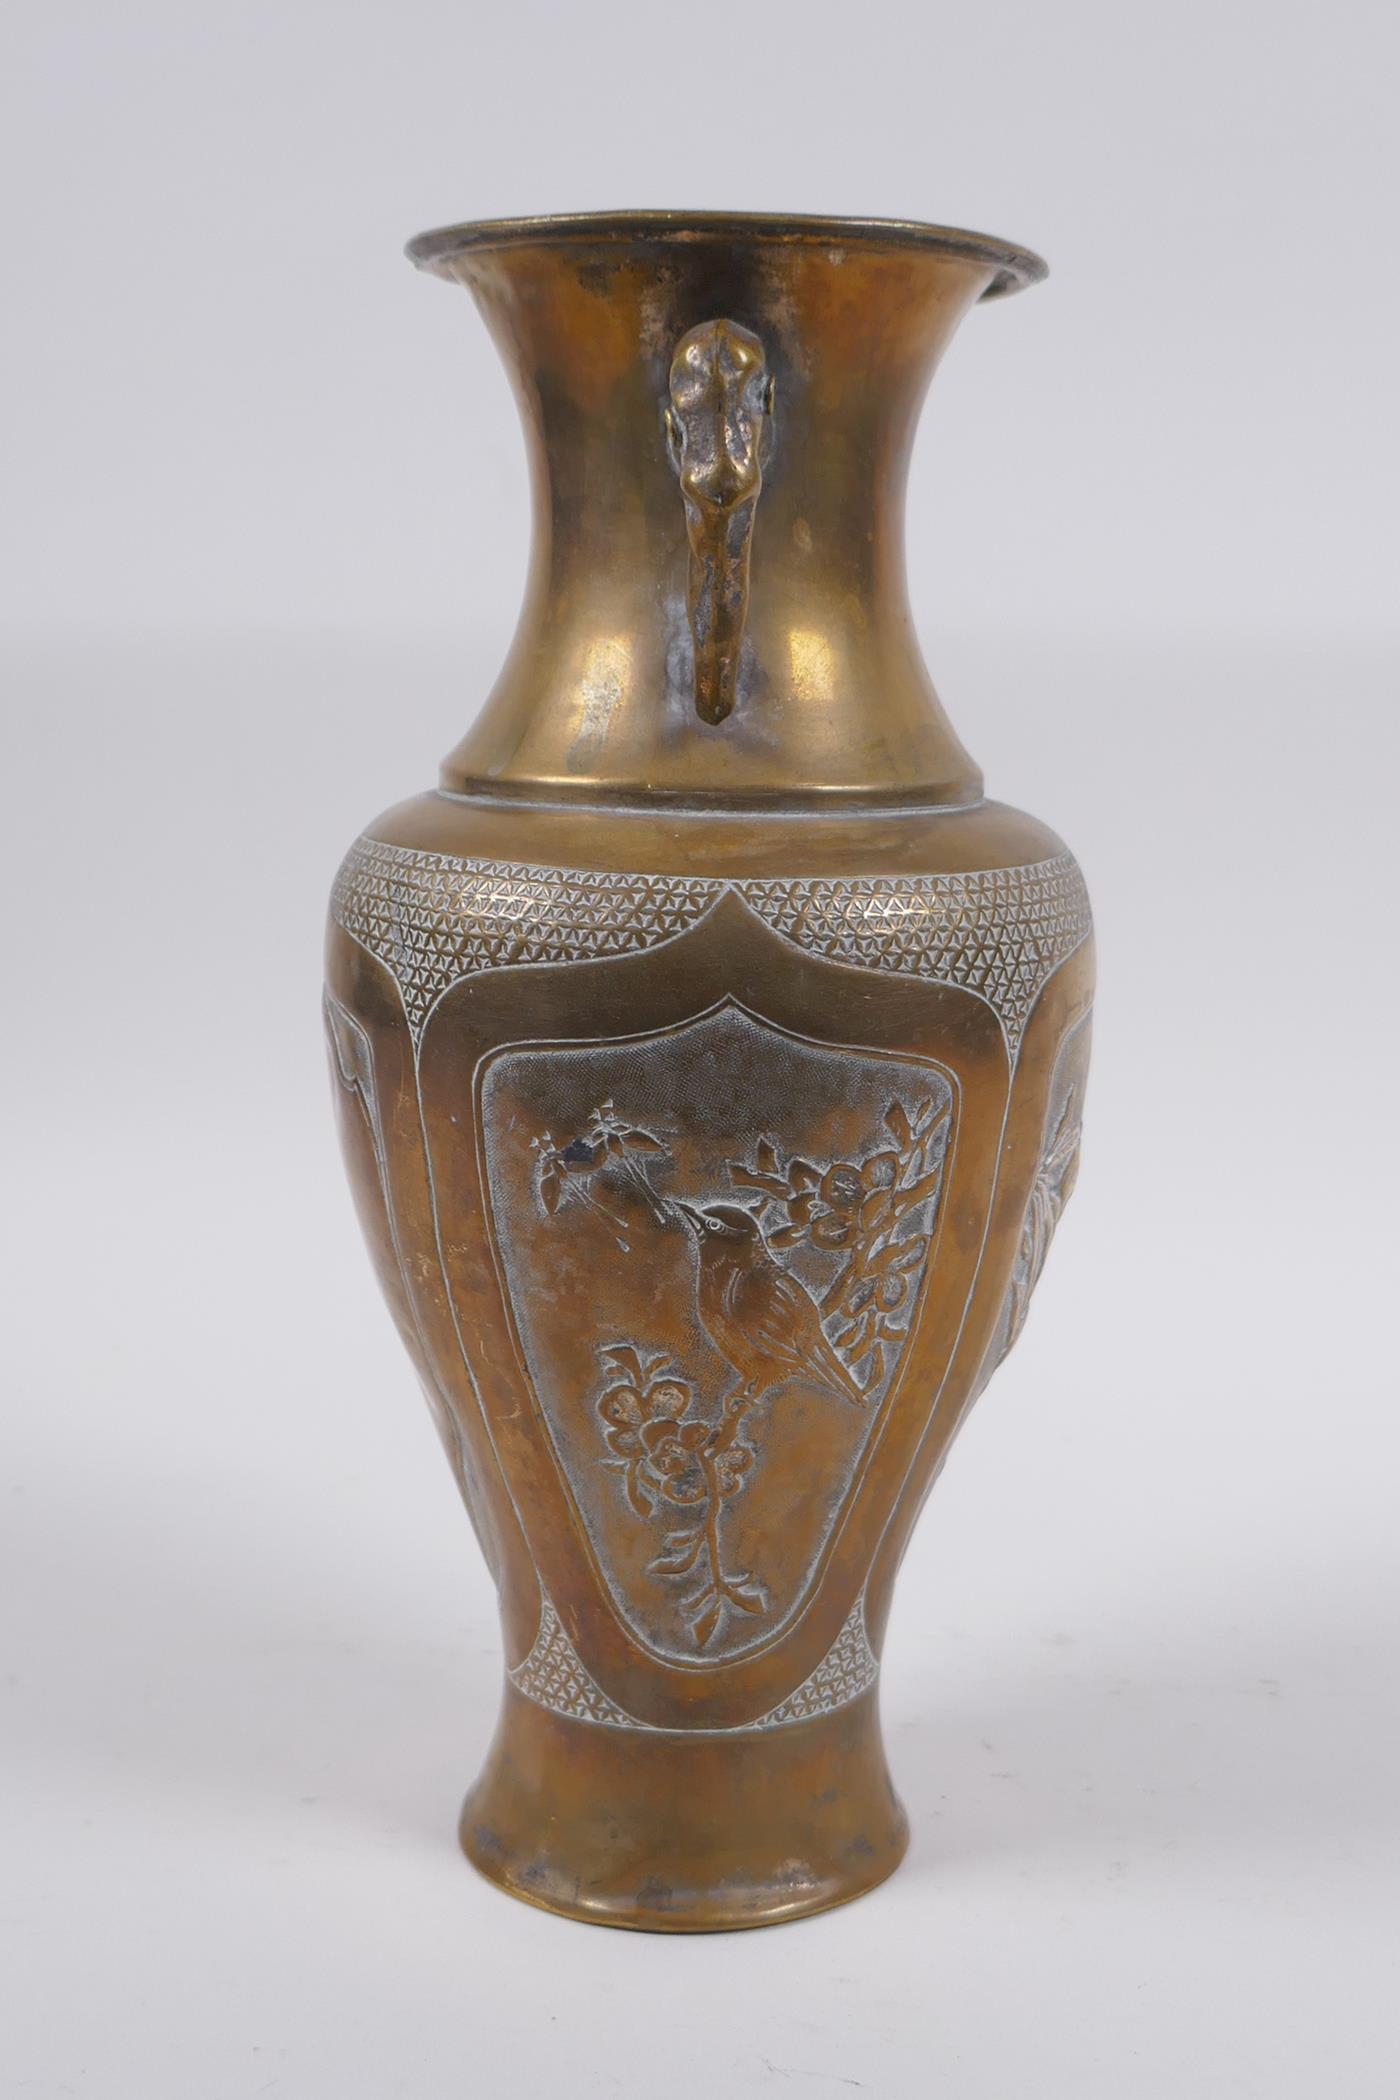 A Japanese Meiji bronze vase with two handles and decorative panels depicting birds and - Image 5 of 8